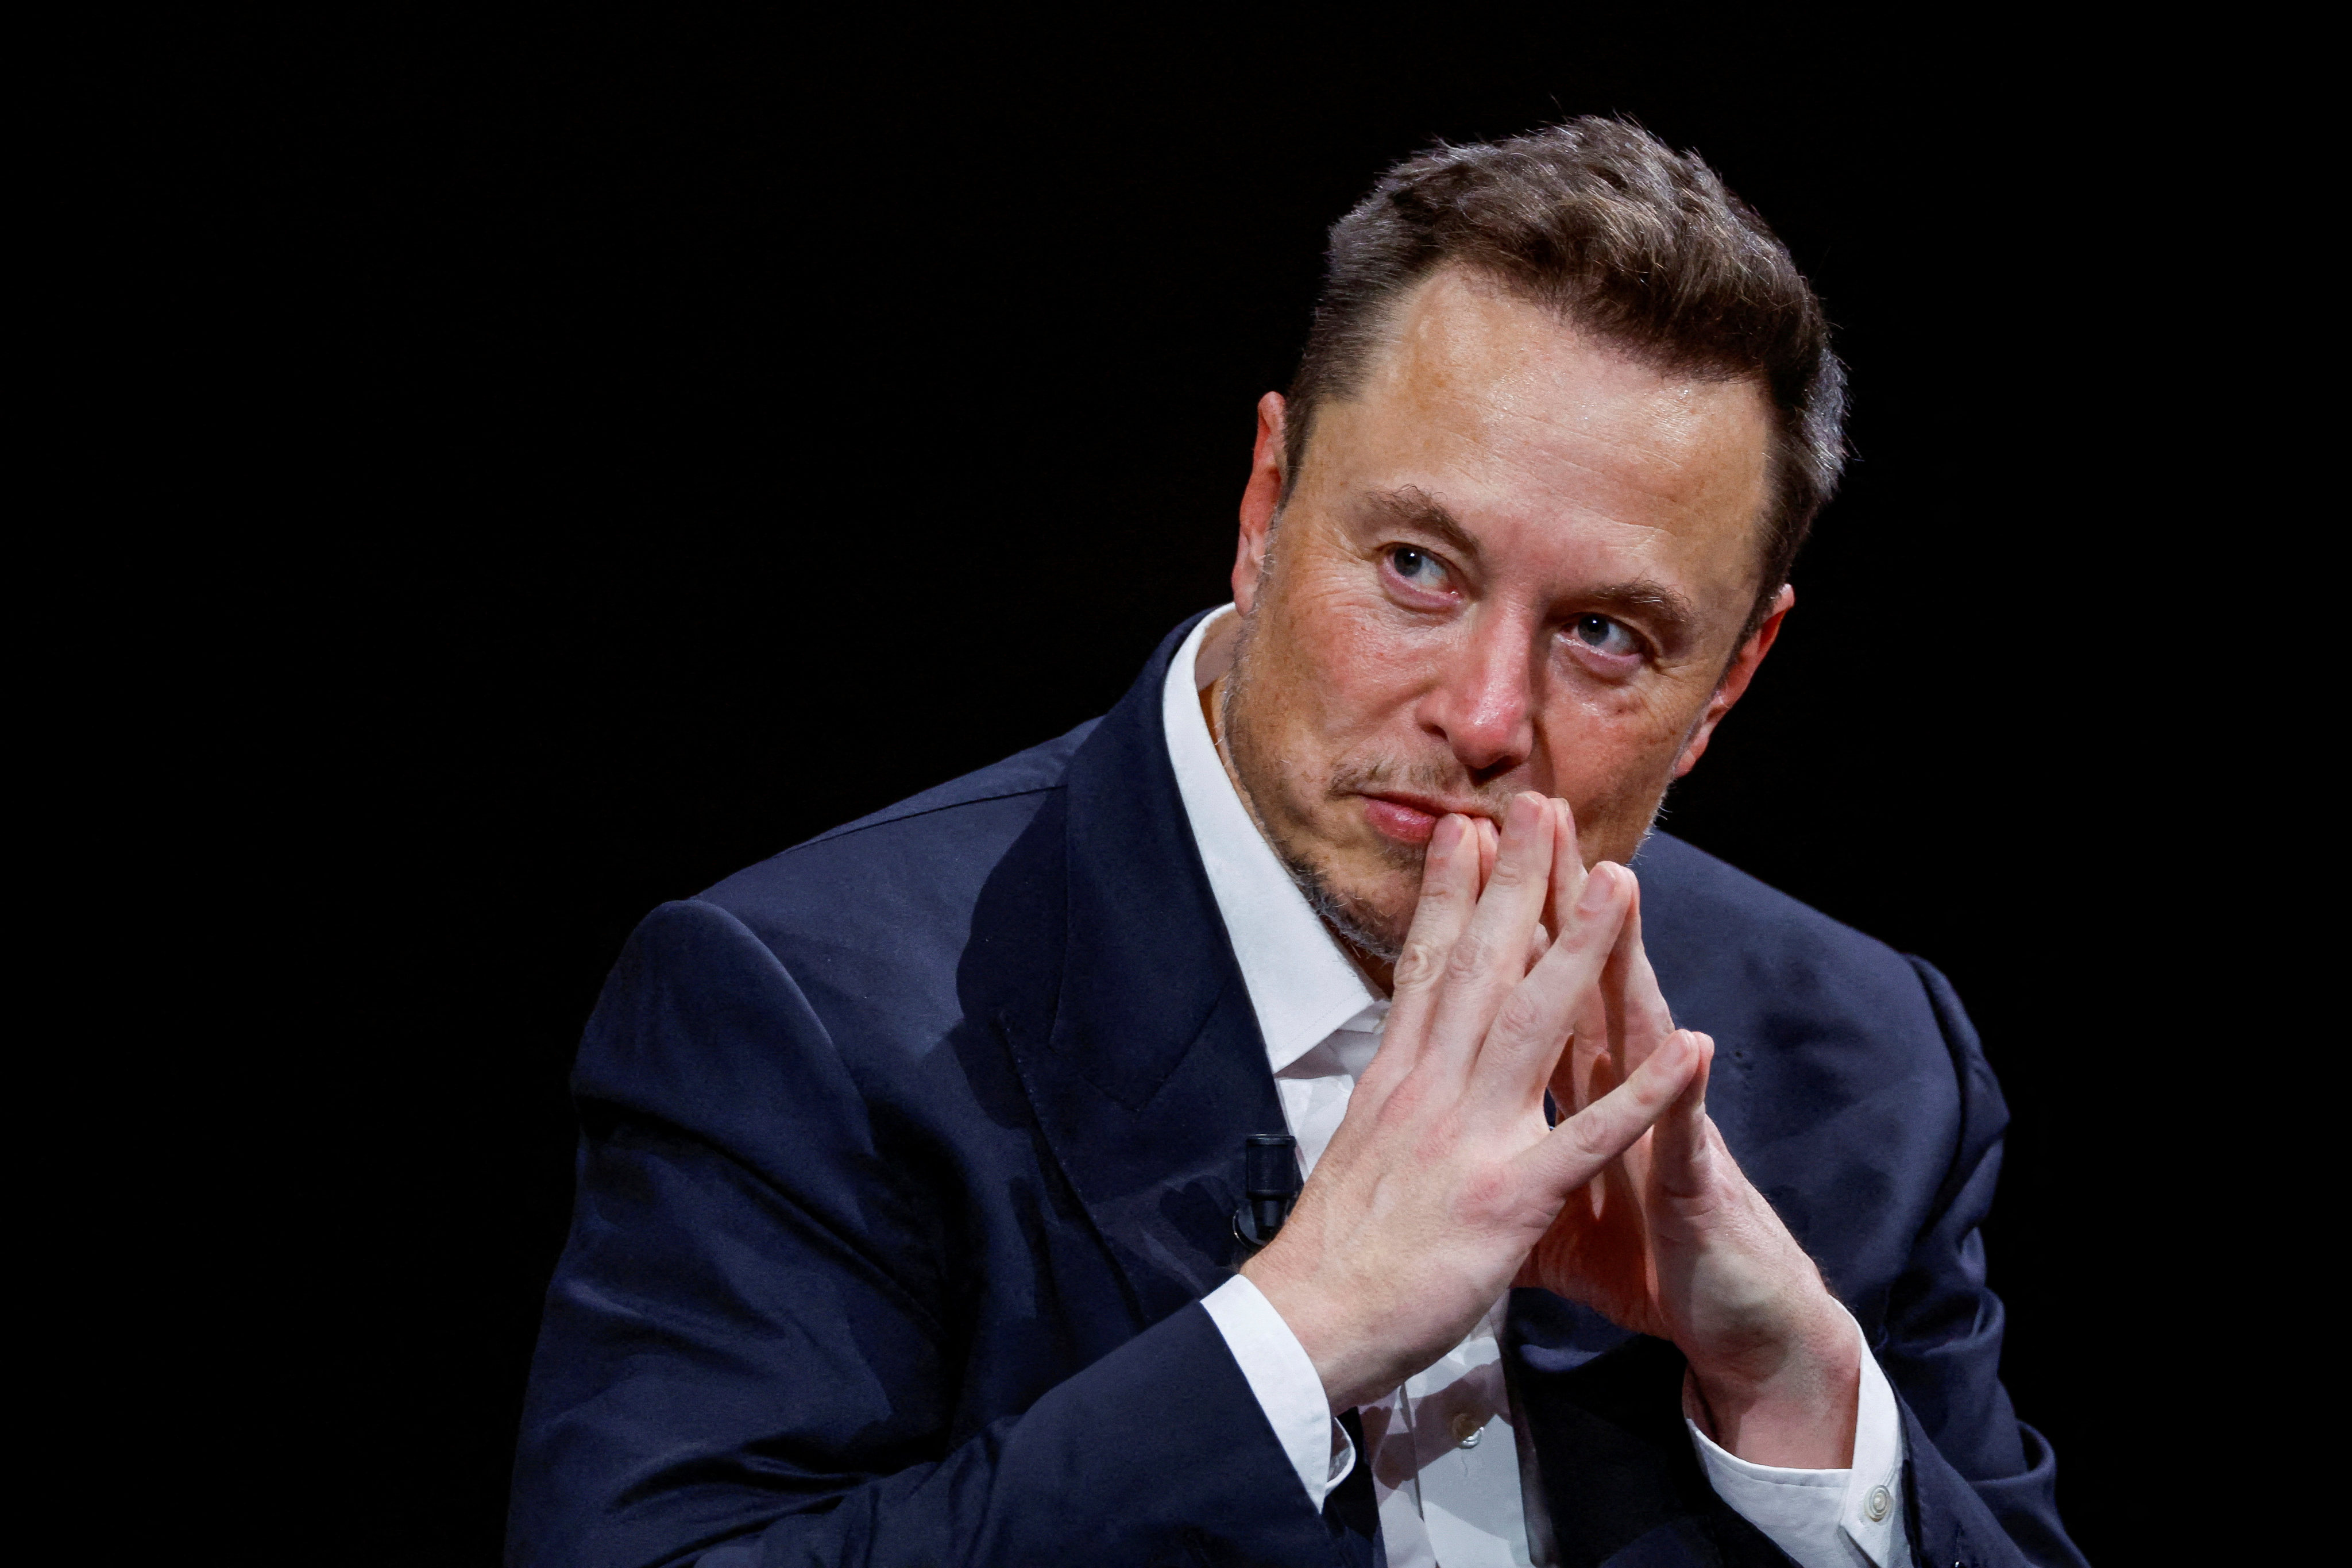 SpaceX CEO Elon Musk. Photo: Reuters